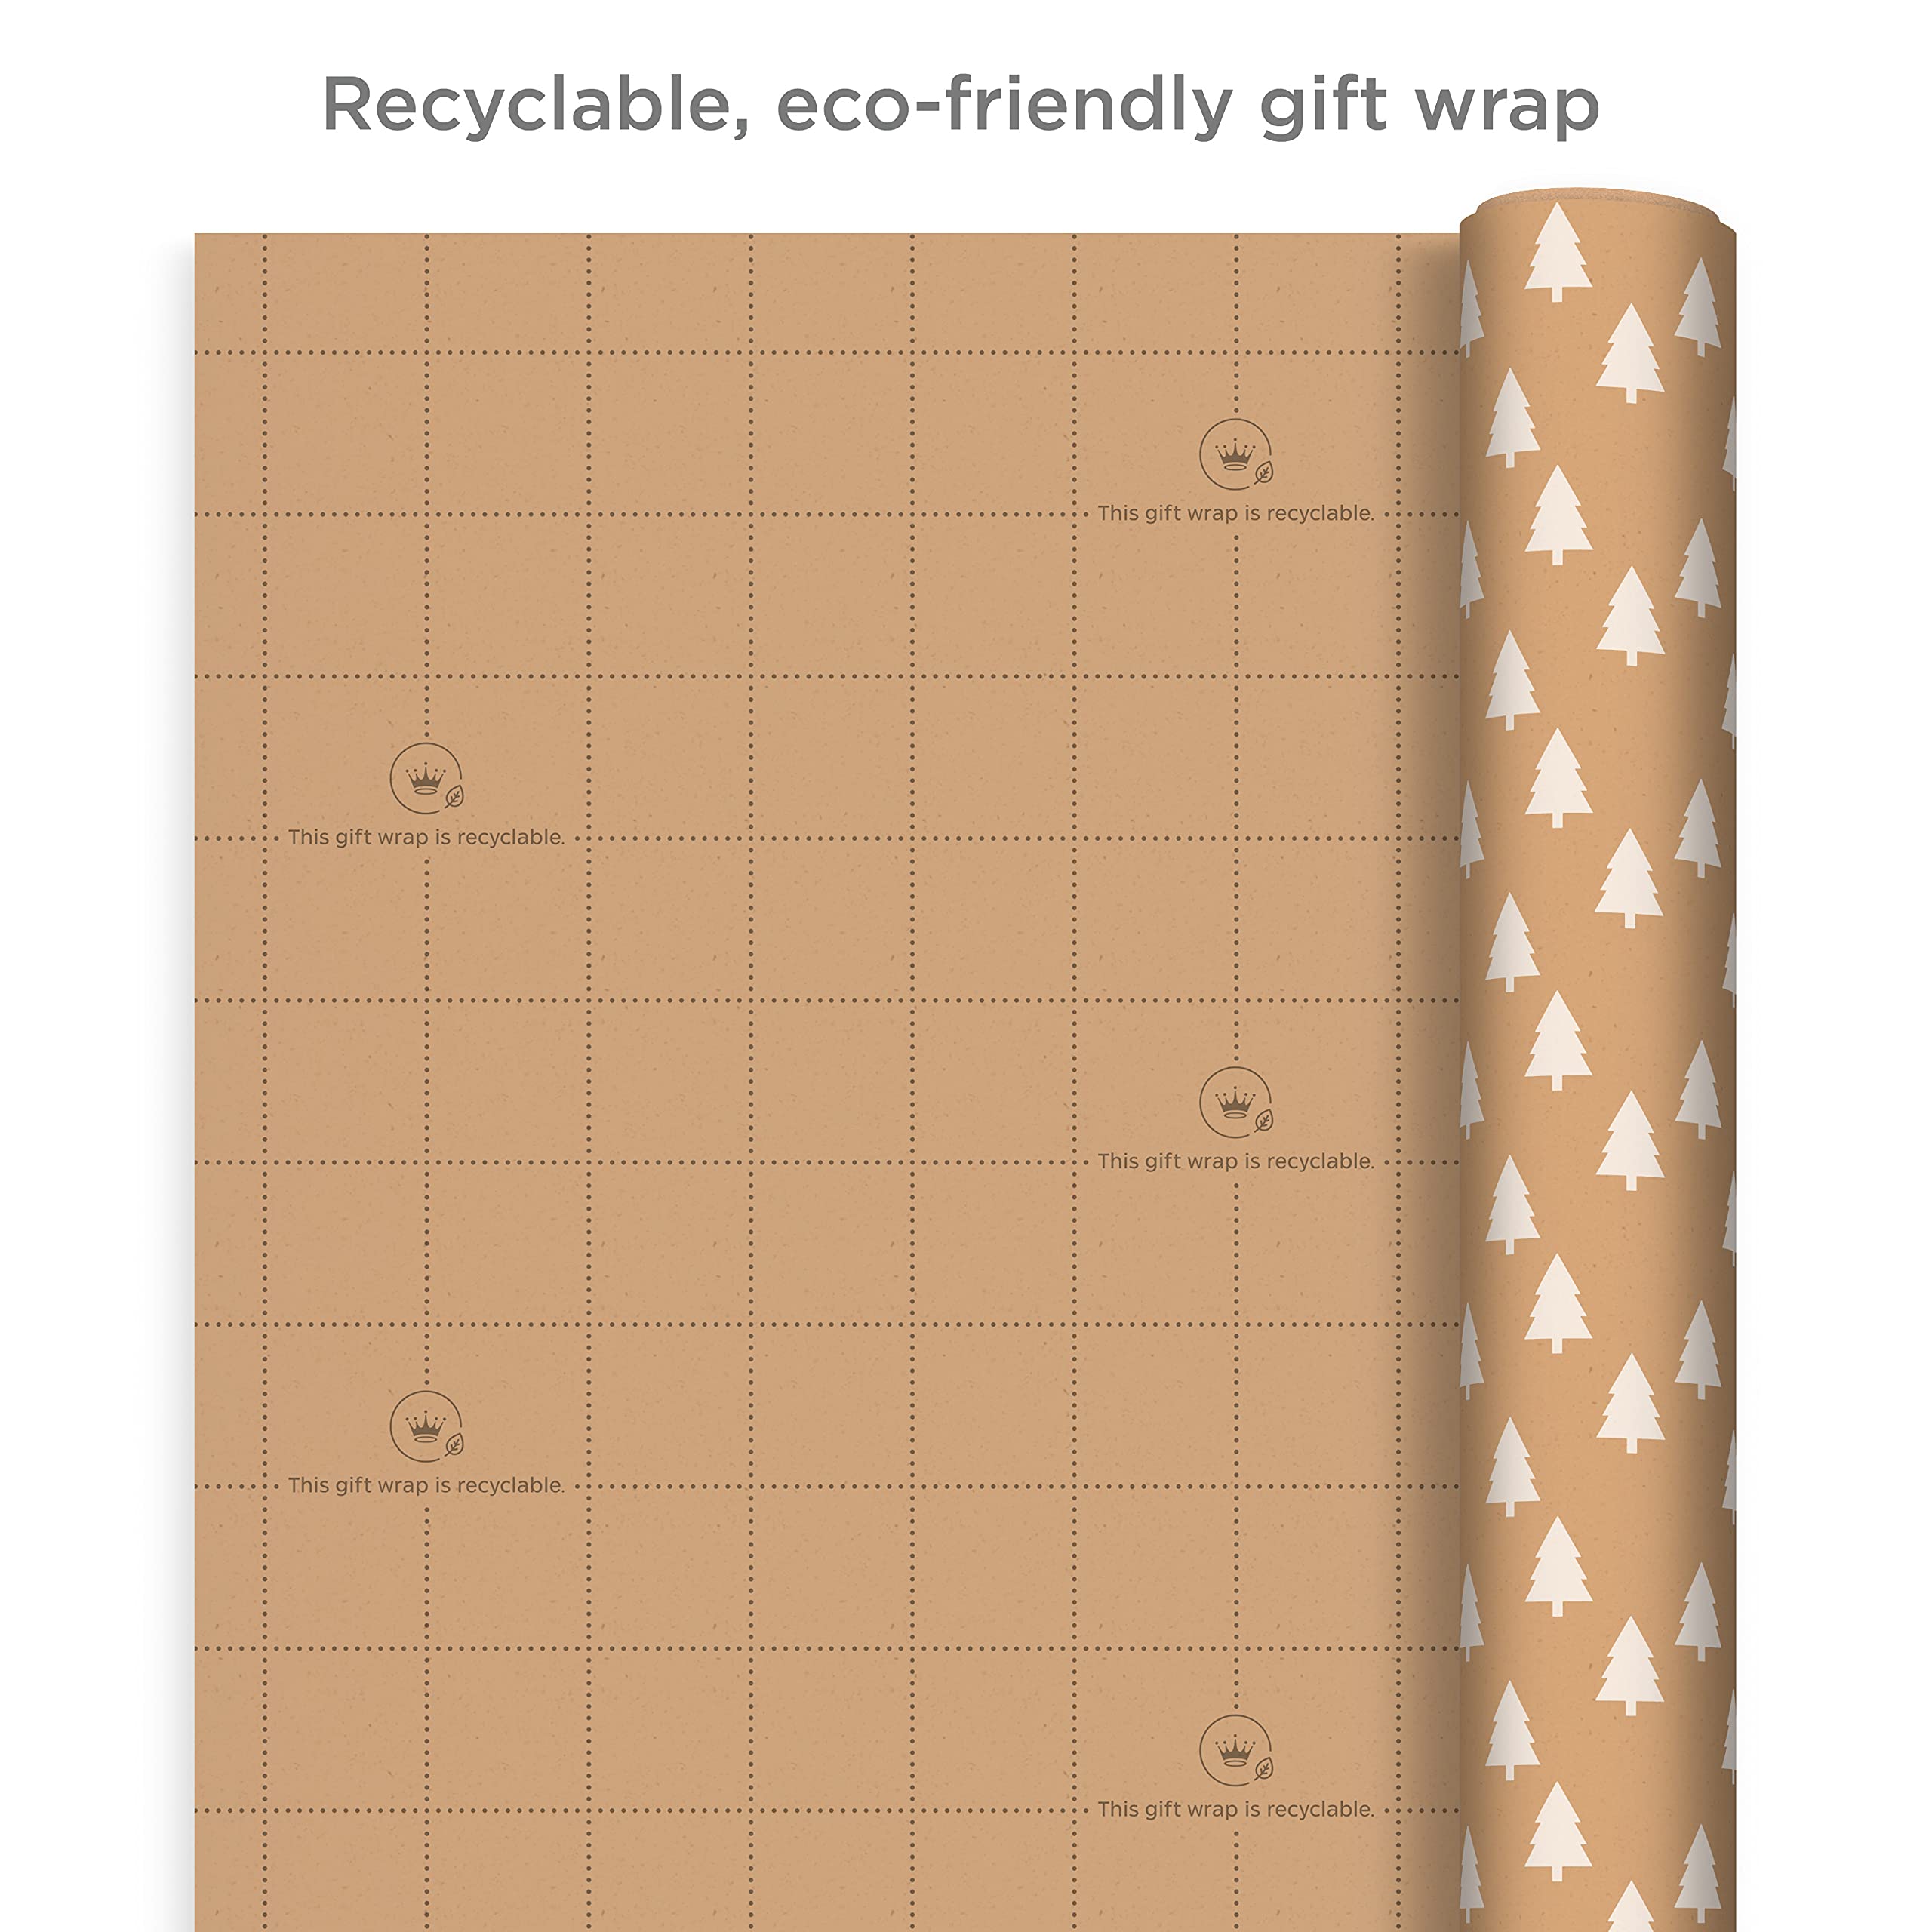 Hallmark Recyclable Kraft Wrapping Paper with Cut Lines (3 Rolls: 90 Sq. Ft. Ttl.) Minimalist Christmas, White Trees, Deer Antlers, Snowflakes on Brown Kraft for Holidays, Weddings, Winter Solstice, 30 Sq Ft (0005JXW1210)